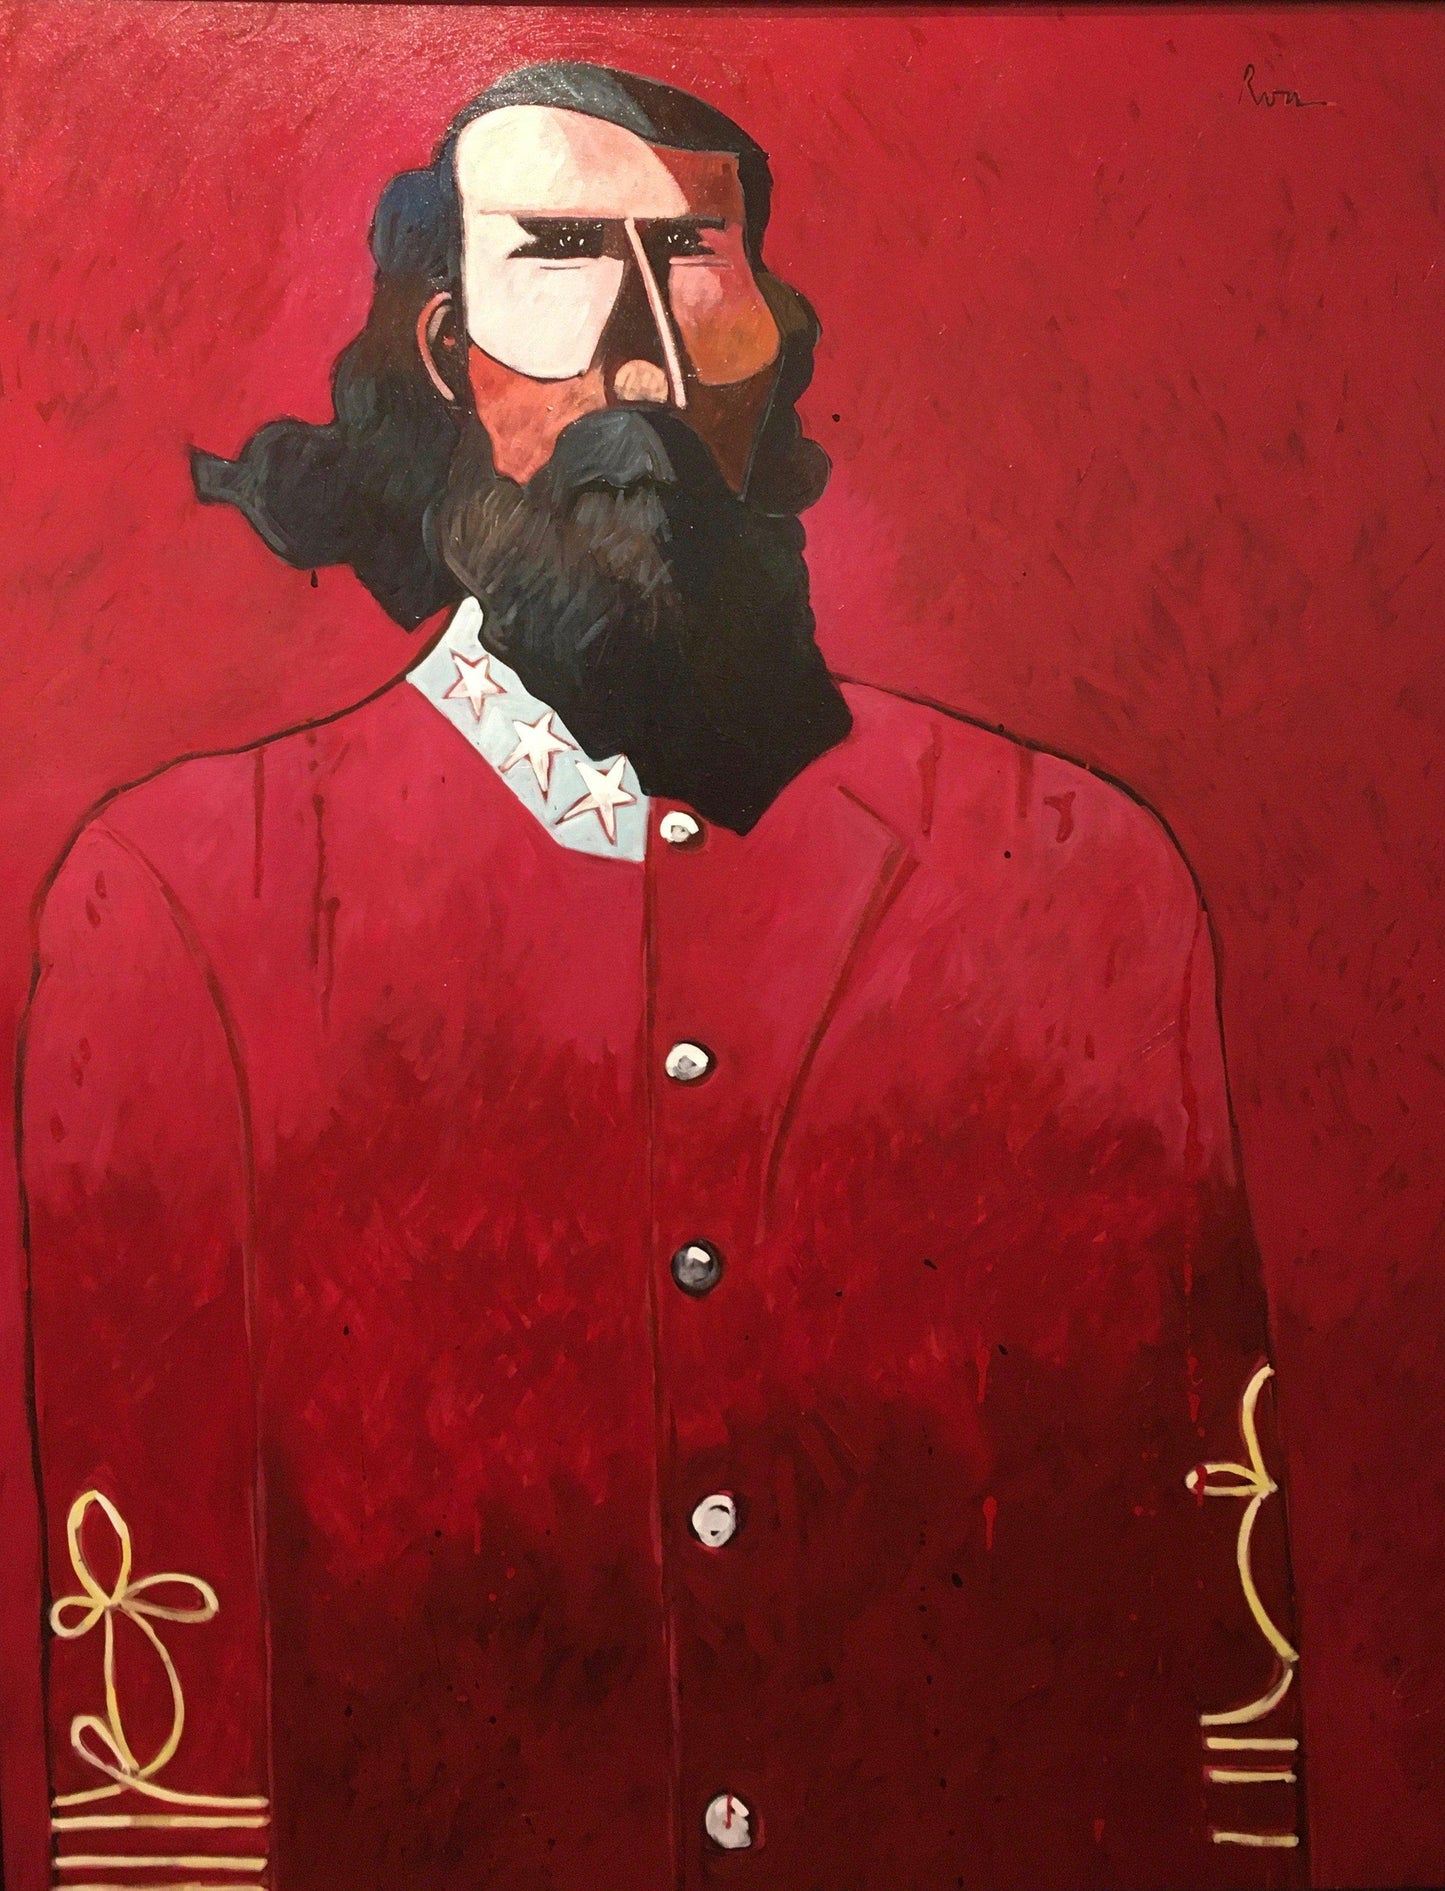 A.P. Hill and His Red Battle Shirt-Painting-Thom Ross-Sorrel Sky Gallery